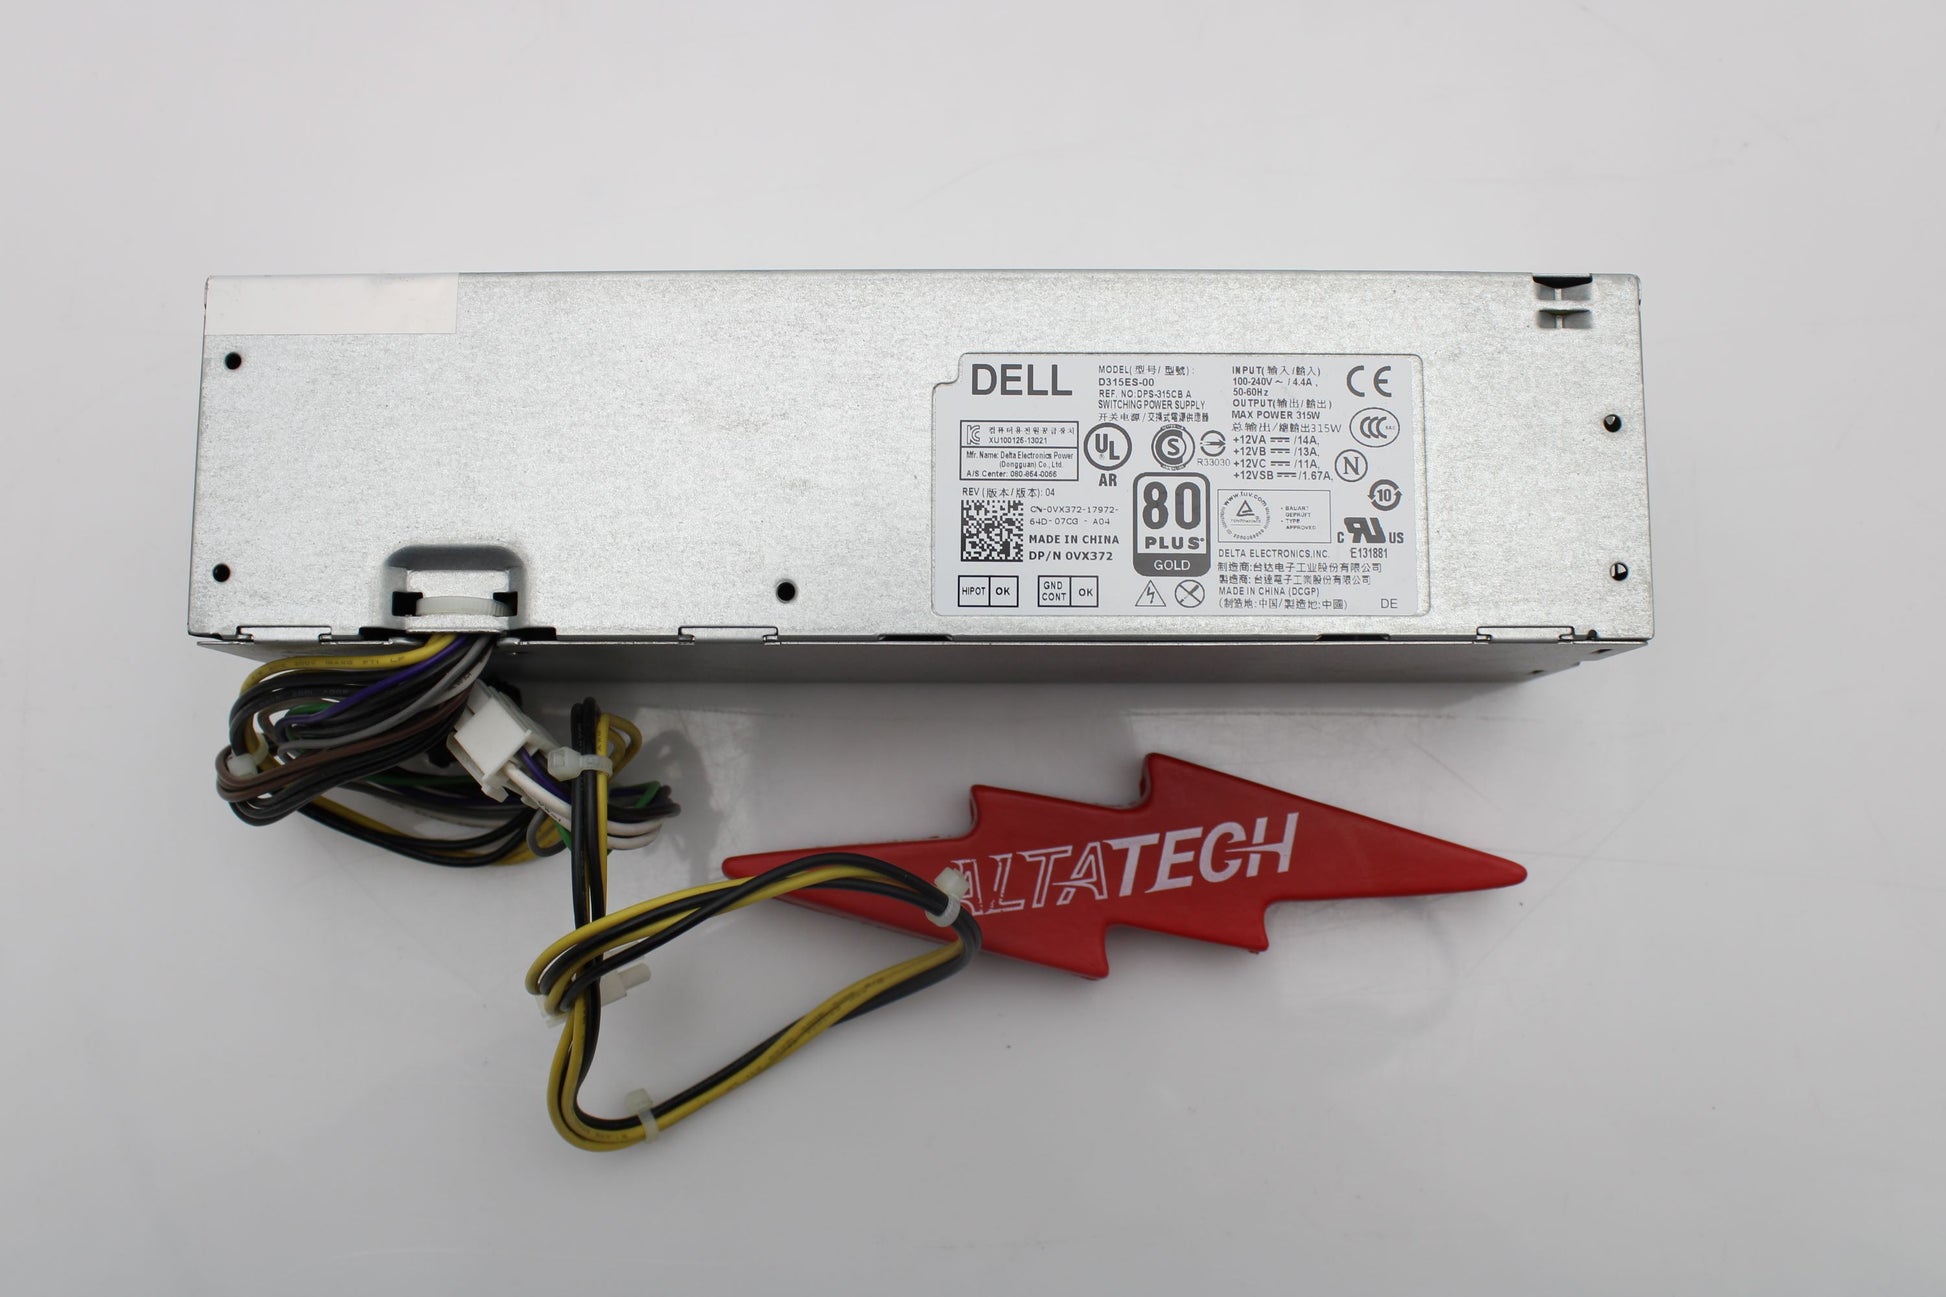 Dell 0VX372 OptiPlex 315W Power Supply for XE2 SFF Desktop, Used